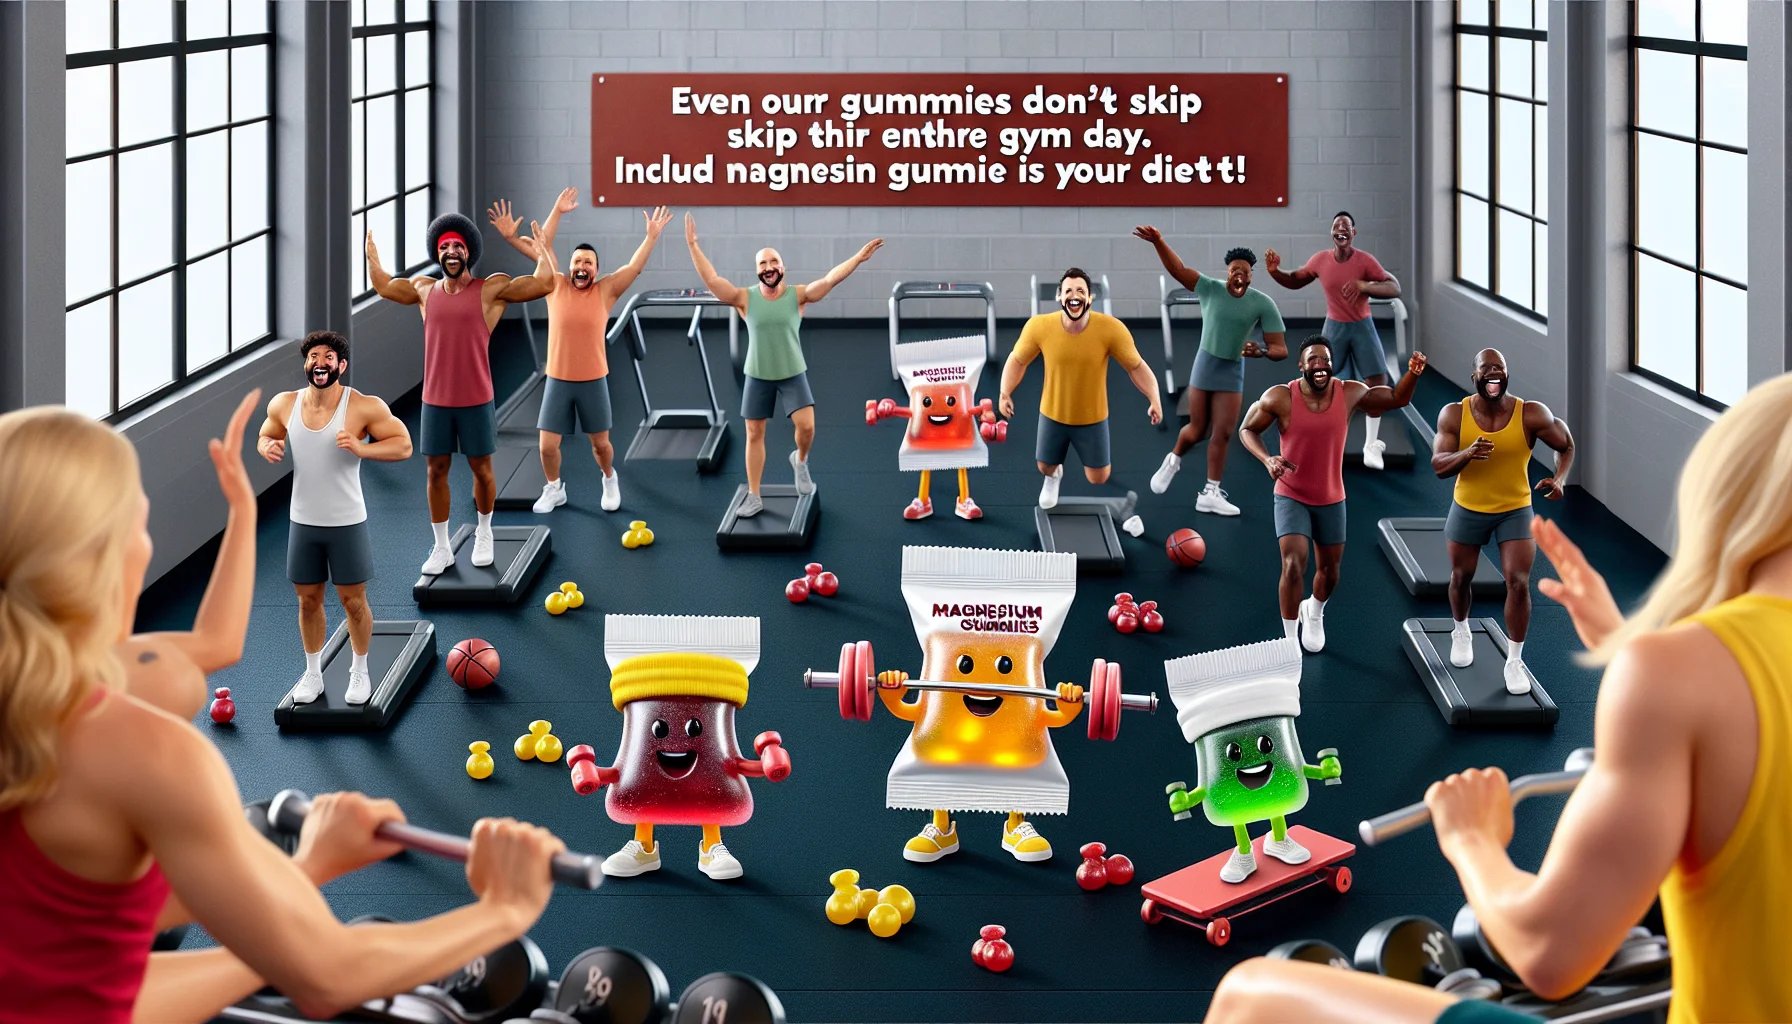 Generate a realistic image of an amusing scene set in a gym. At the center, place a couple of magnesium gummies, personified, diligently working out. The gummies have bright smiles and are possibly lifting tiny weights or running on mini treadmills. Athletes of different genders and descents such as Caucasian, Hispanic, and Middle-Eastern are laughing and pointing towards the exercising gummies, surprised and amused at their dedication to fitness. At the top of the image, text reads, 'Even our gummies don't skip the gym day. Include magnesium gummies in your diet!'